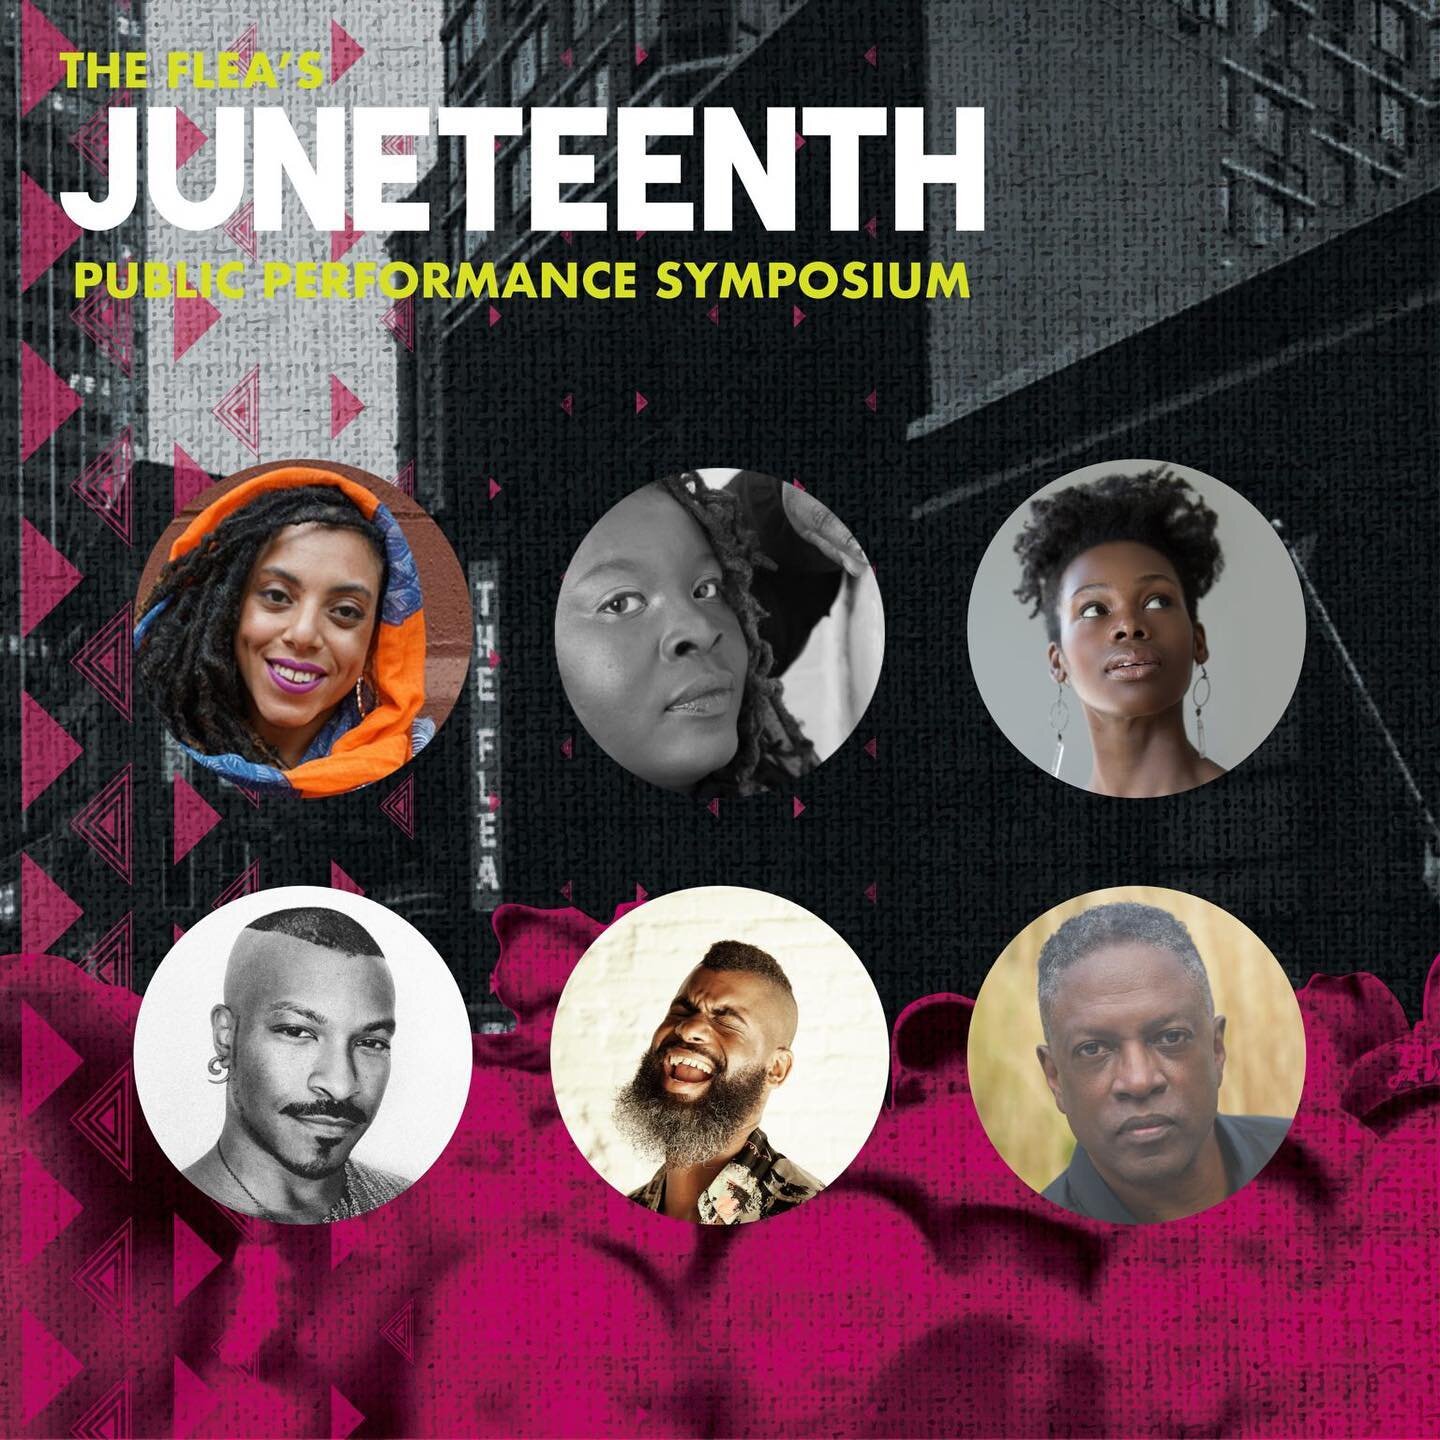 THE FLEA&rsquo;S JUNETEENTH PUBLIC PERFORMANCE SYMPOSIUM
June 16, 2022 at 7pm ET at The Flea Theater
FREE, Reservation required (theflea.org)

Moderated by Nia Witherspoon

Please join moderator Nia Witherspoon and commissioned artists James Scruggs,